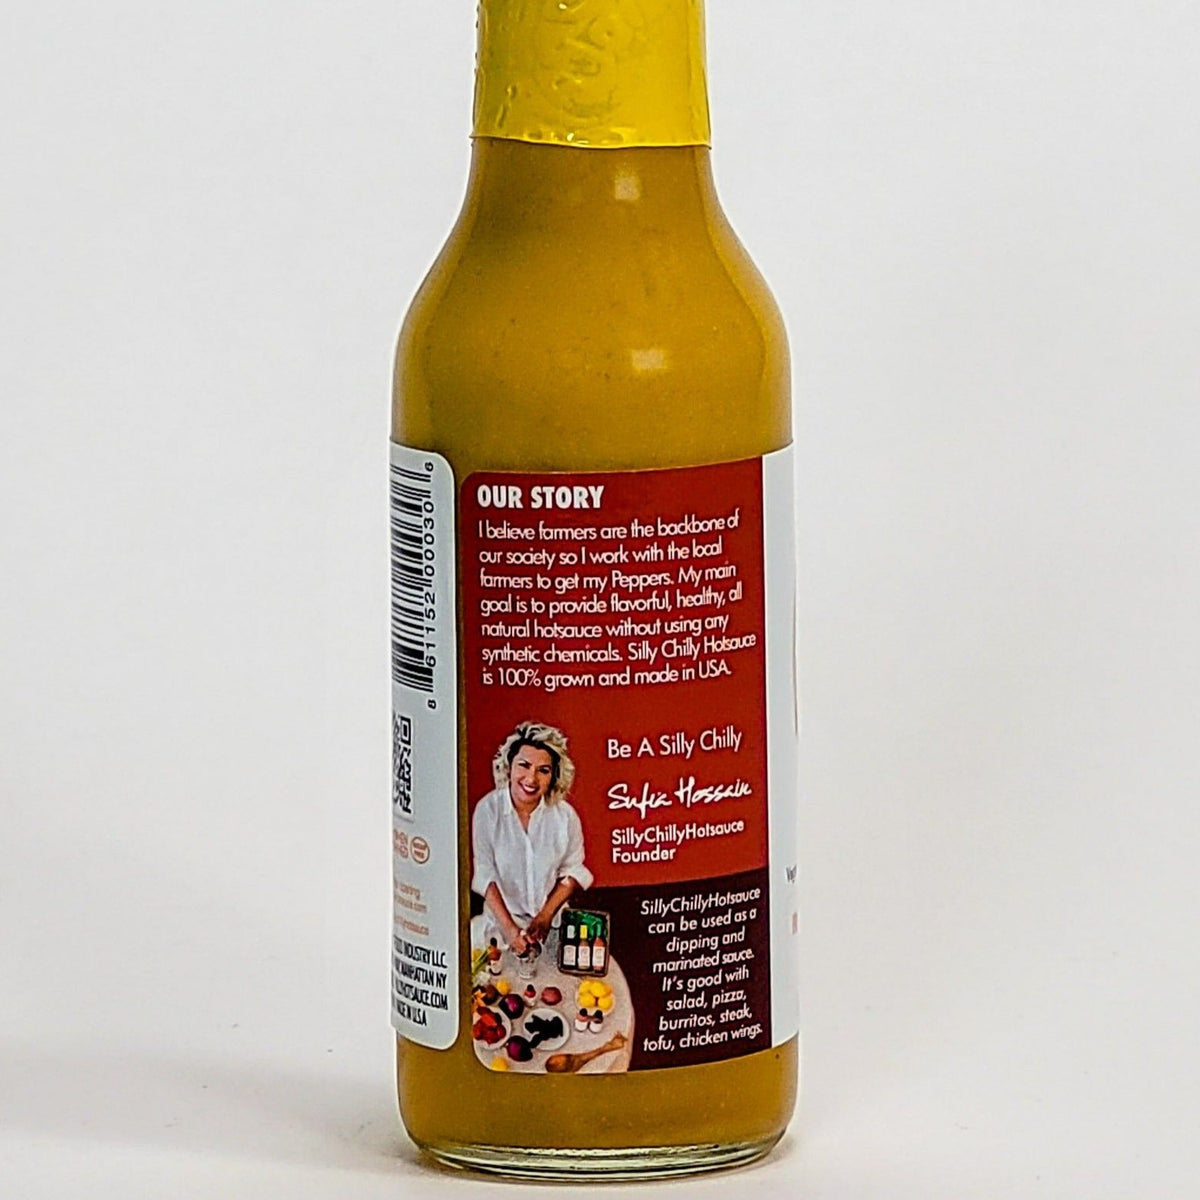 silly chilly hot sauce fresh mango and sweet peppers label info